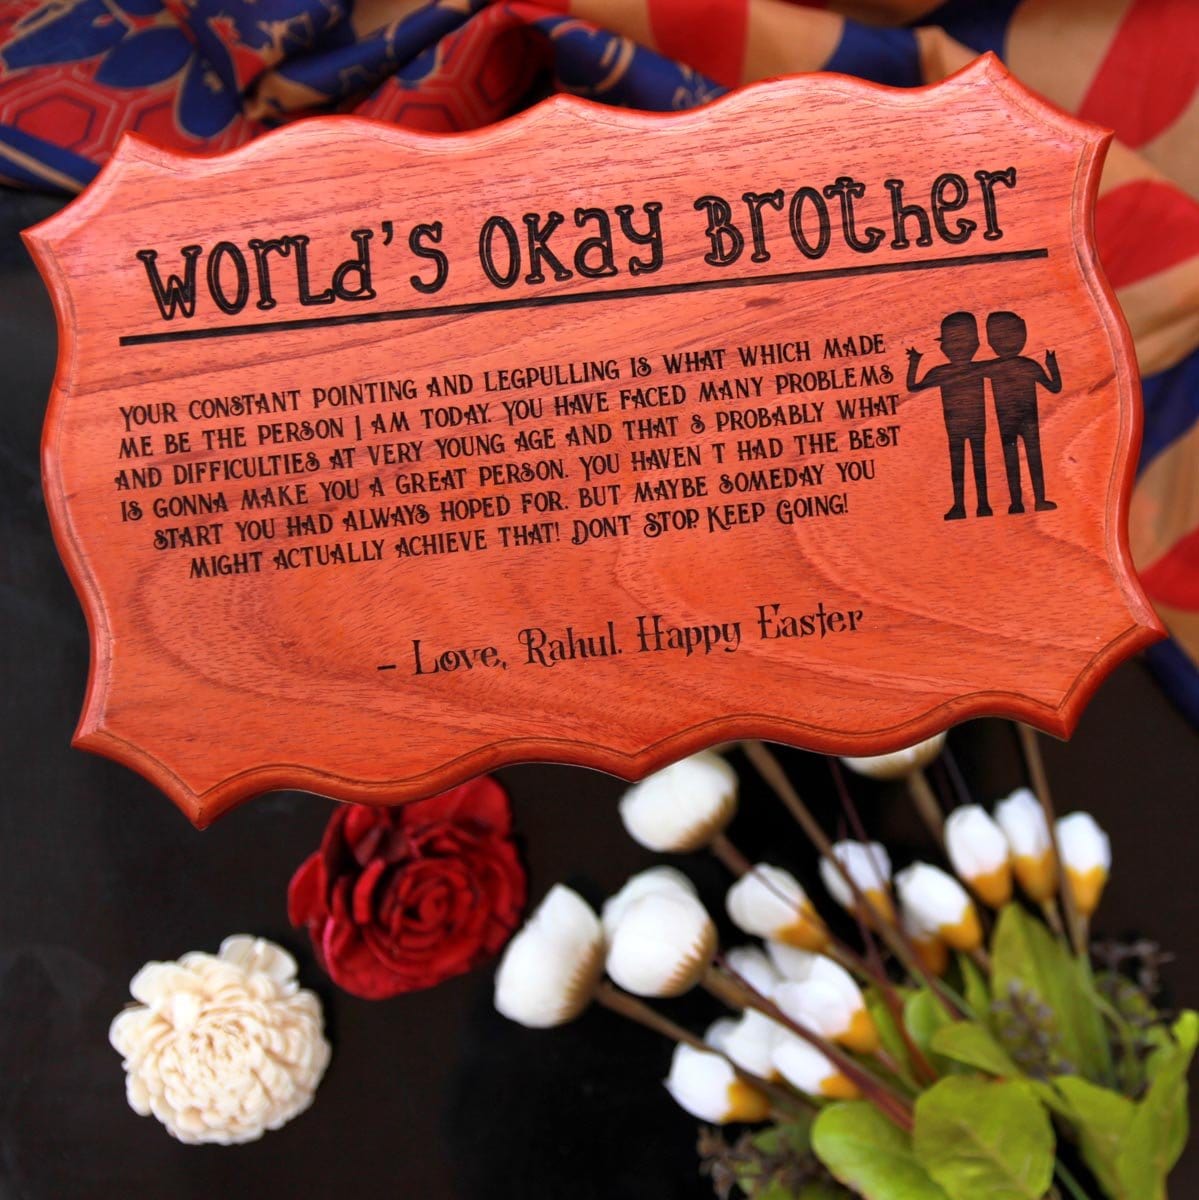 Custom Made Wood Sign For The World's Okay Brother - This Wood Certificate Plaque Makes One Of The Best Gift Ideas For Brother - Shop More Personalized Gifts For Him Online From The Woodgeek Store.